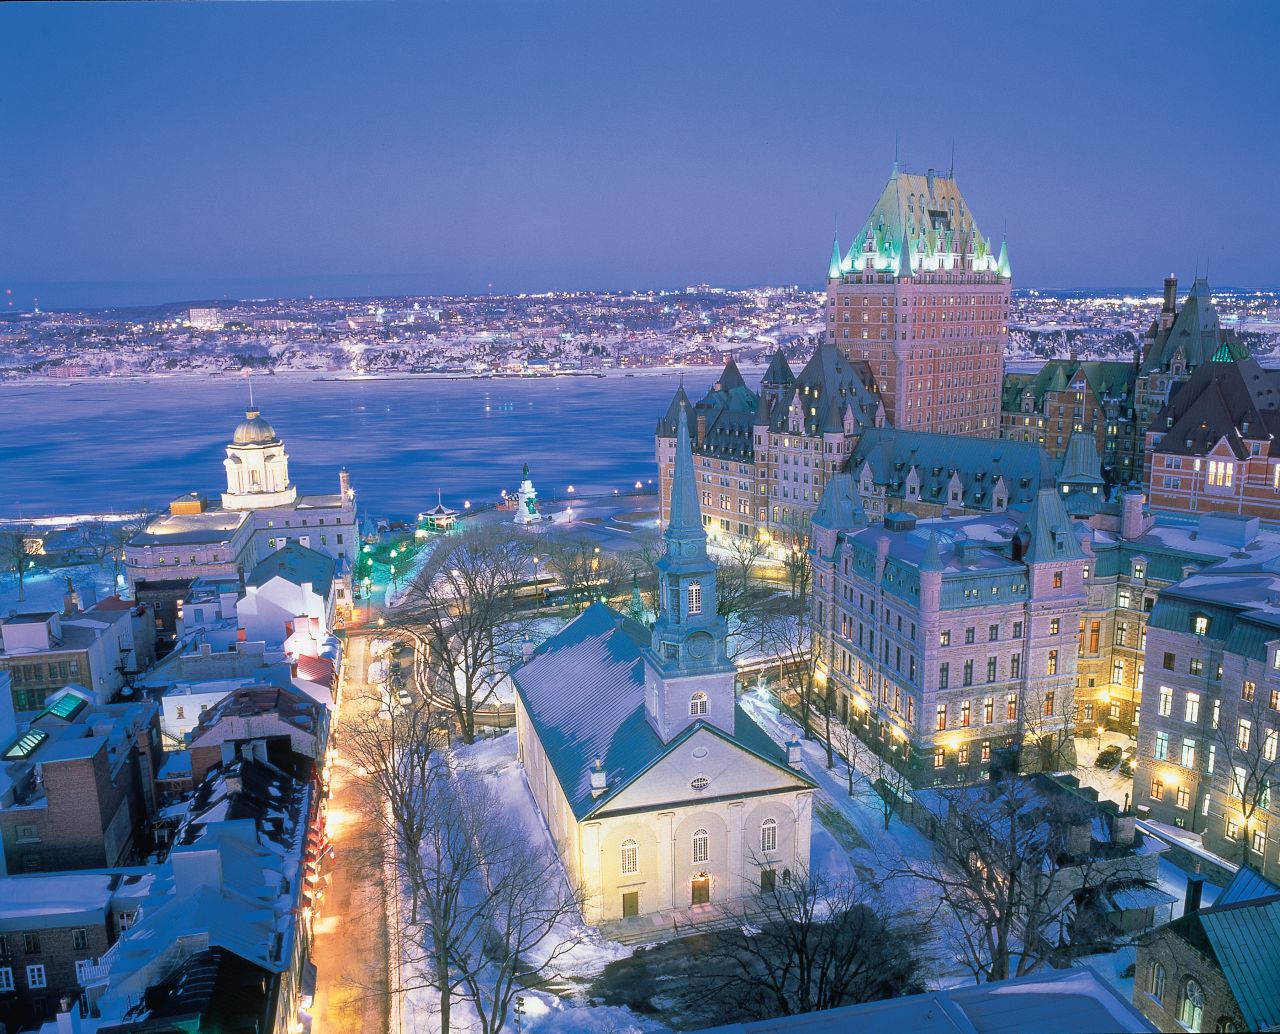 Condé Nast Traveler announced its 2013 Readers' Choice Awards yesterday. Québec City squeezed into the top 10 of the world's Top 25 Cities, due to its "old-world charm," "awesome historic assets" and "great shopping," according to CN Traveler readers.